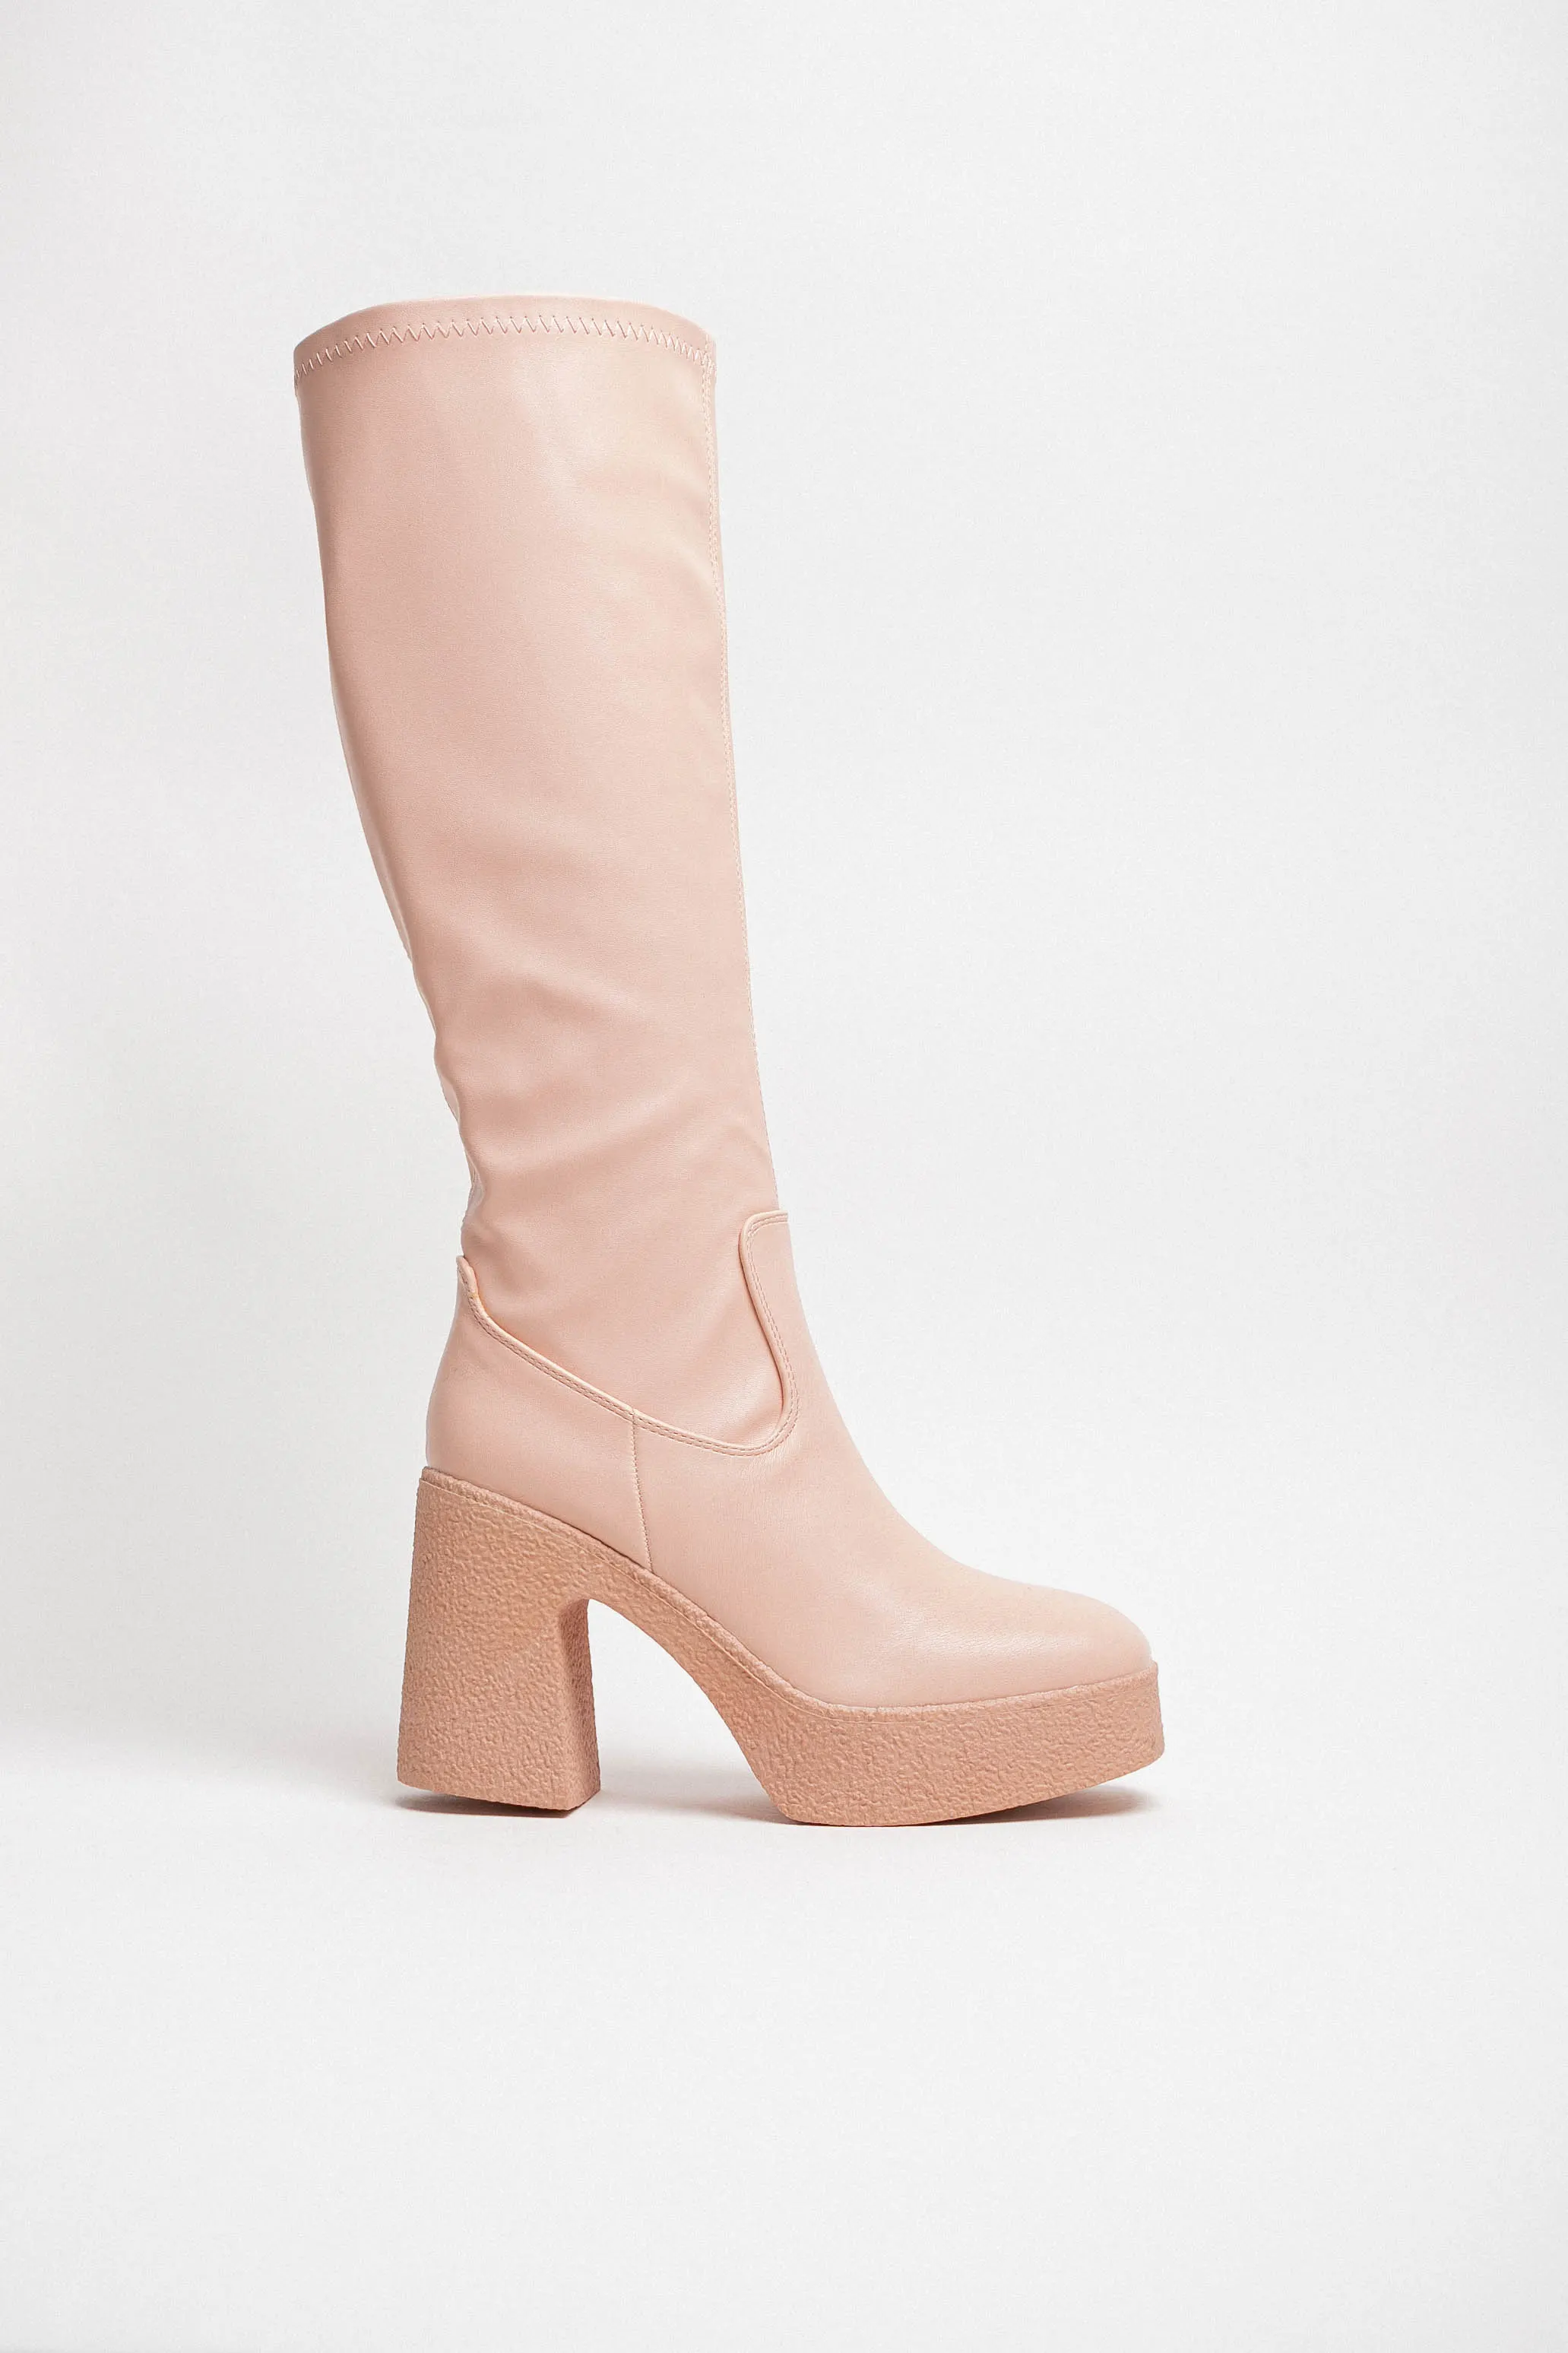 ELY HIGH BOOT - NUDE